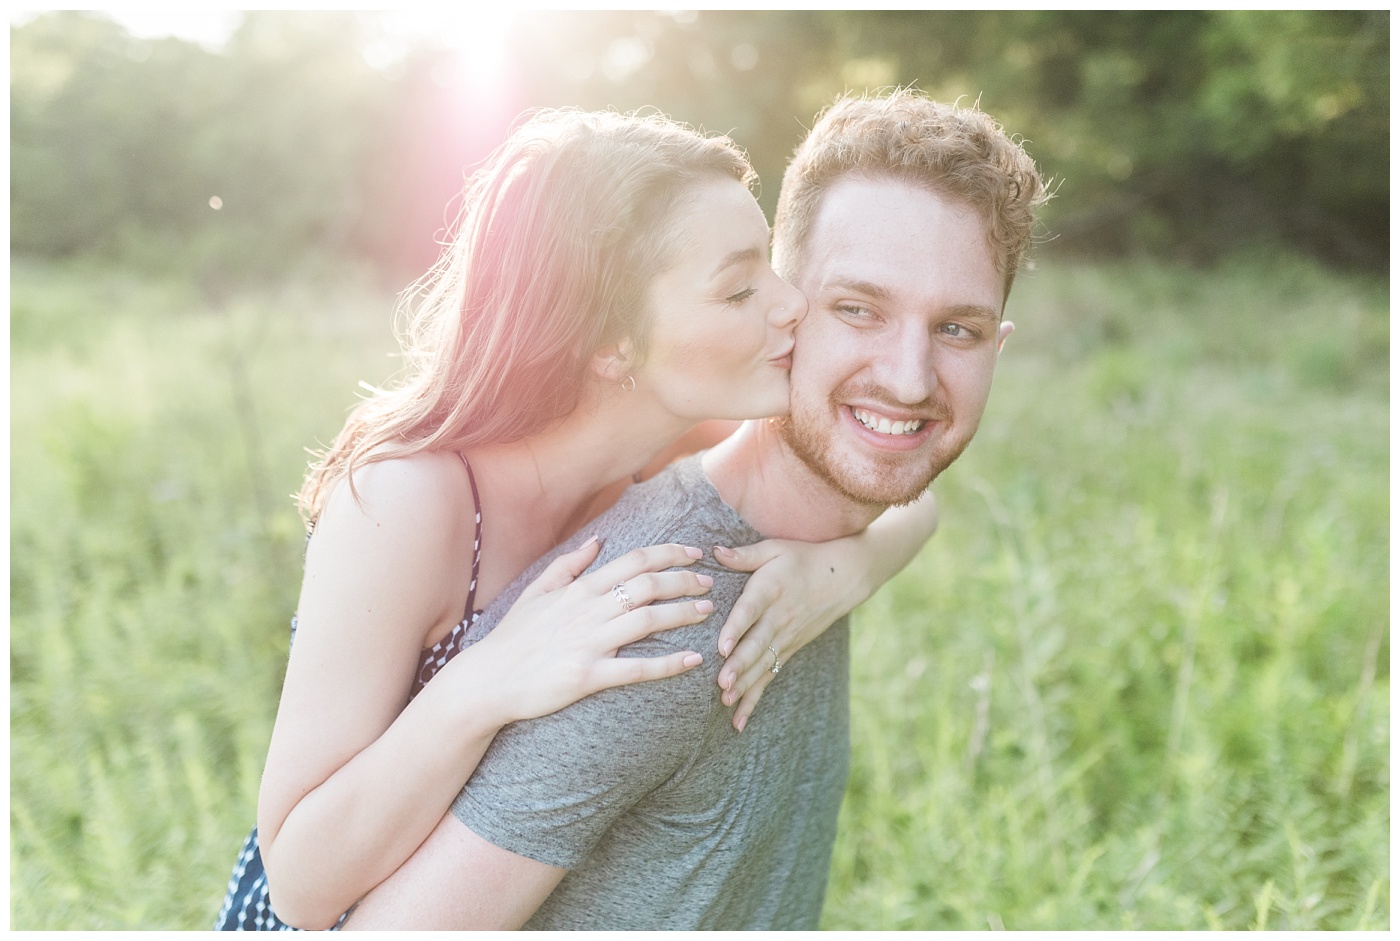 Stephanie Marie Photography Labor for Love Downtown North Liberty Engagement Session Iowa City Wedding Photographer Devin Cody_0016.jpg